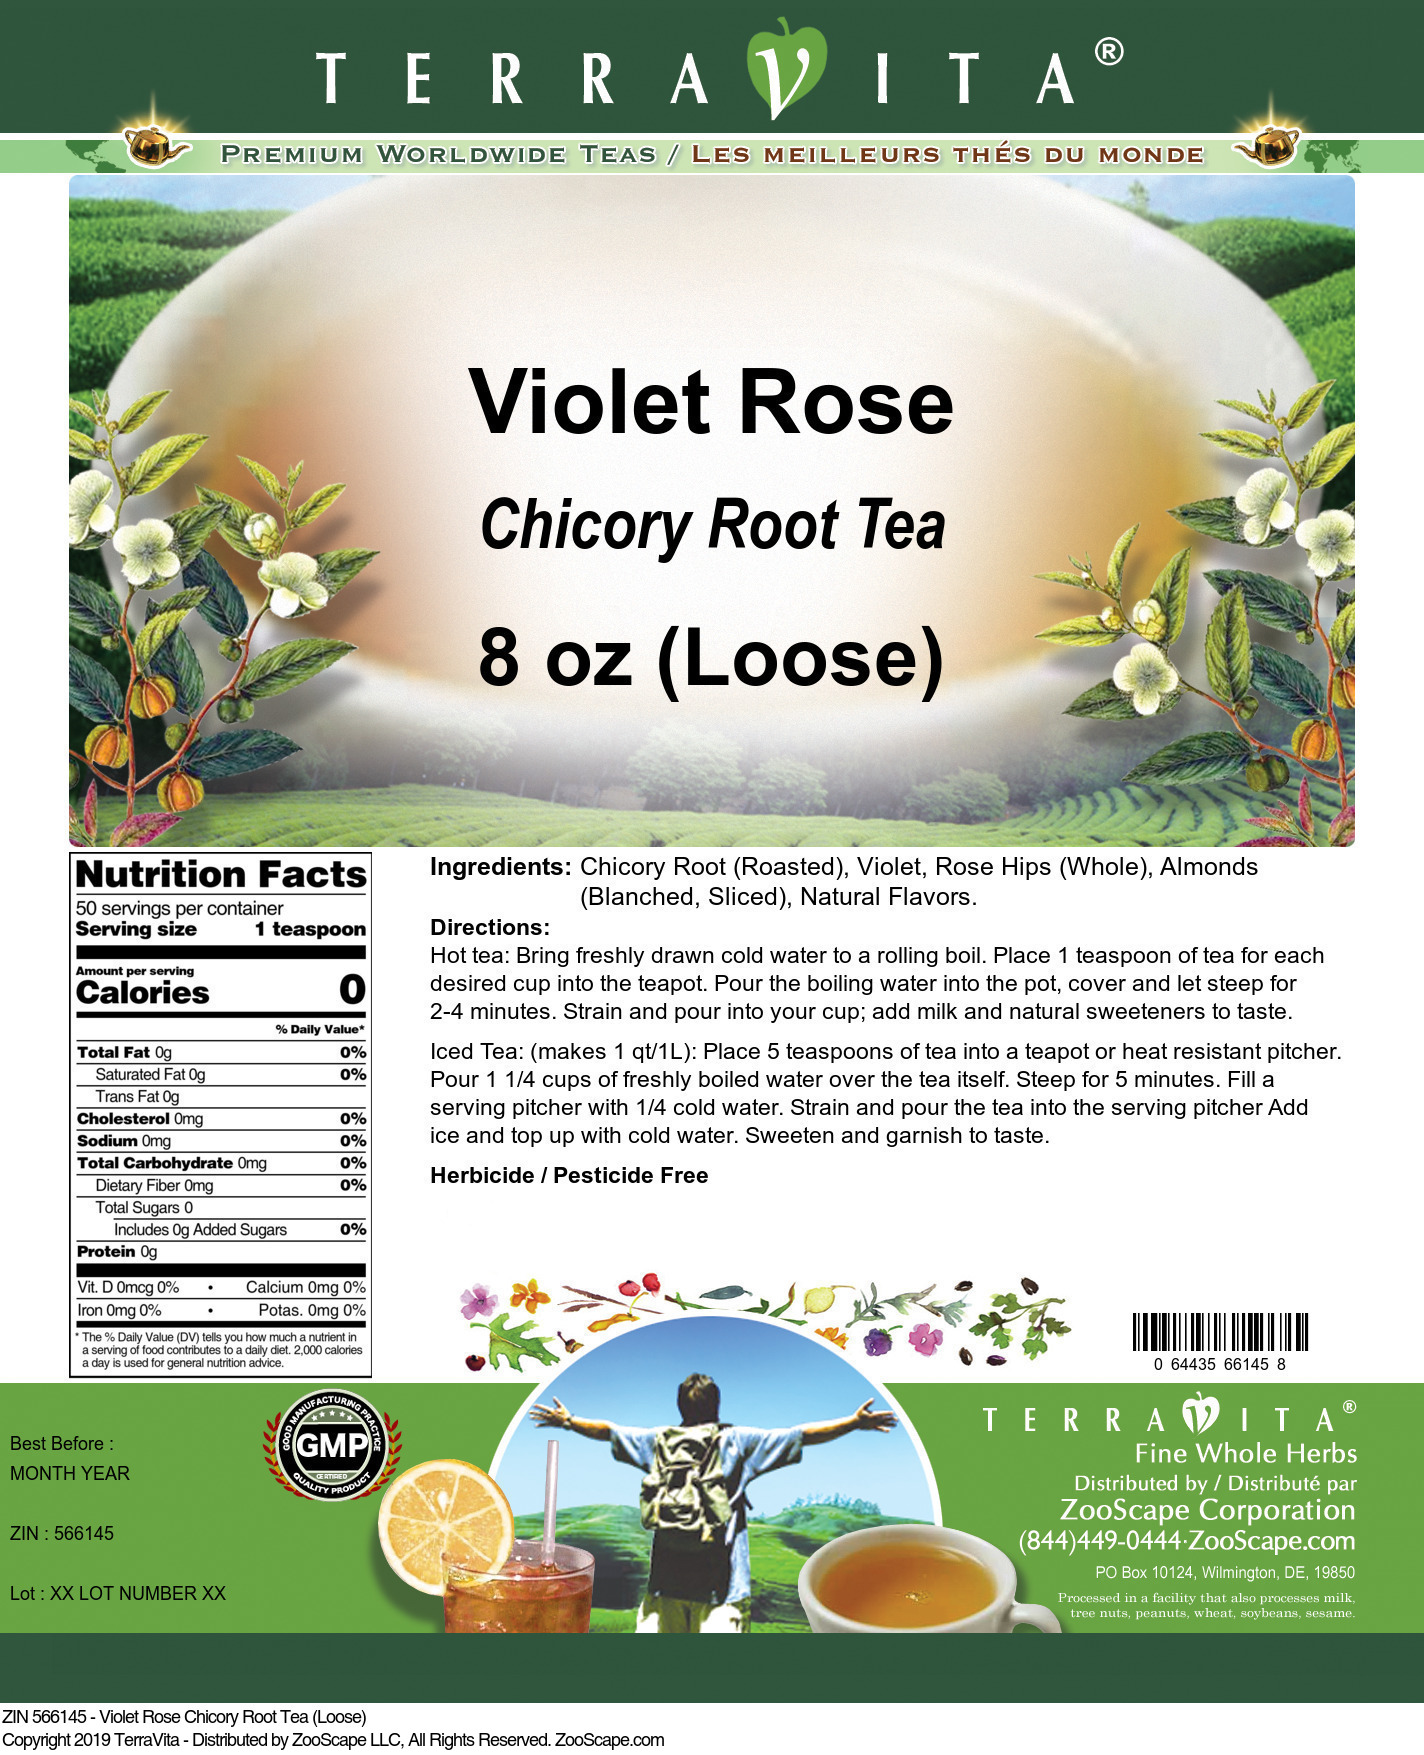 Violet Rose Chicory Root Tea (Loose) - Label